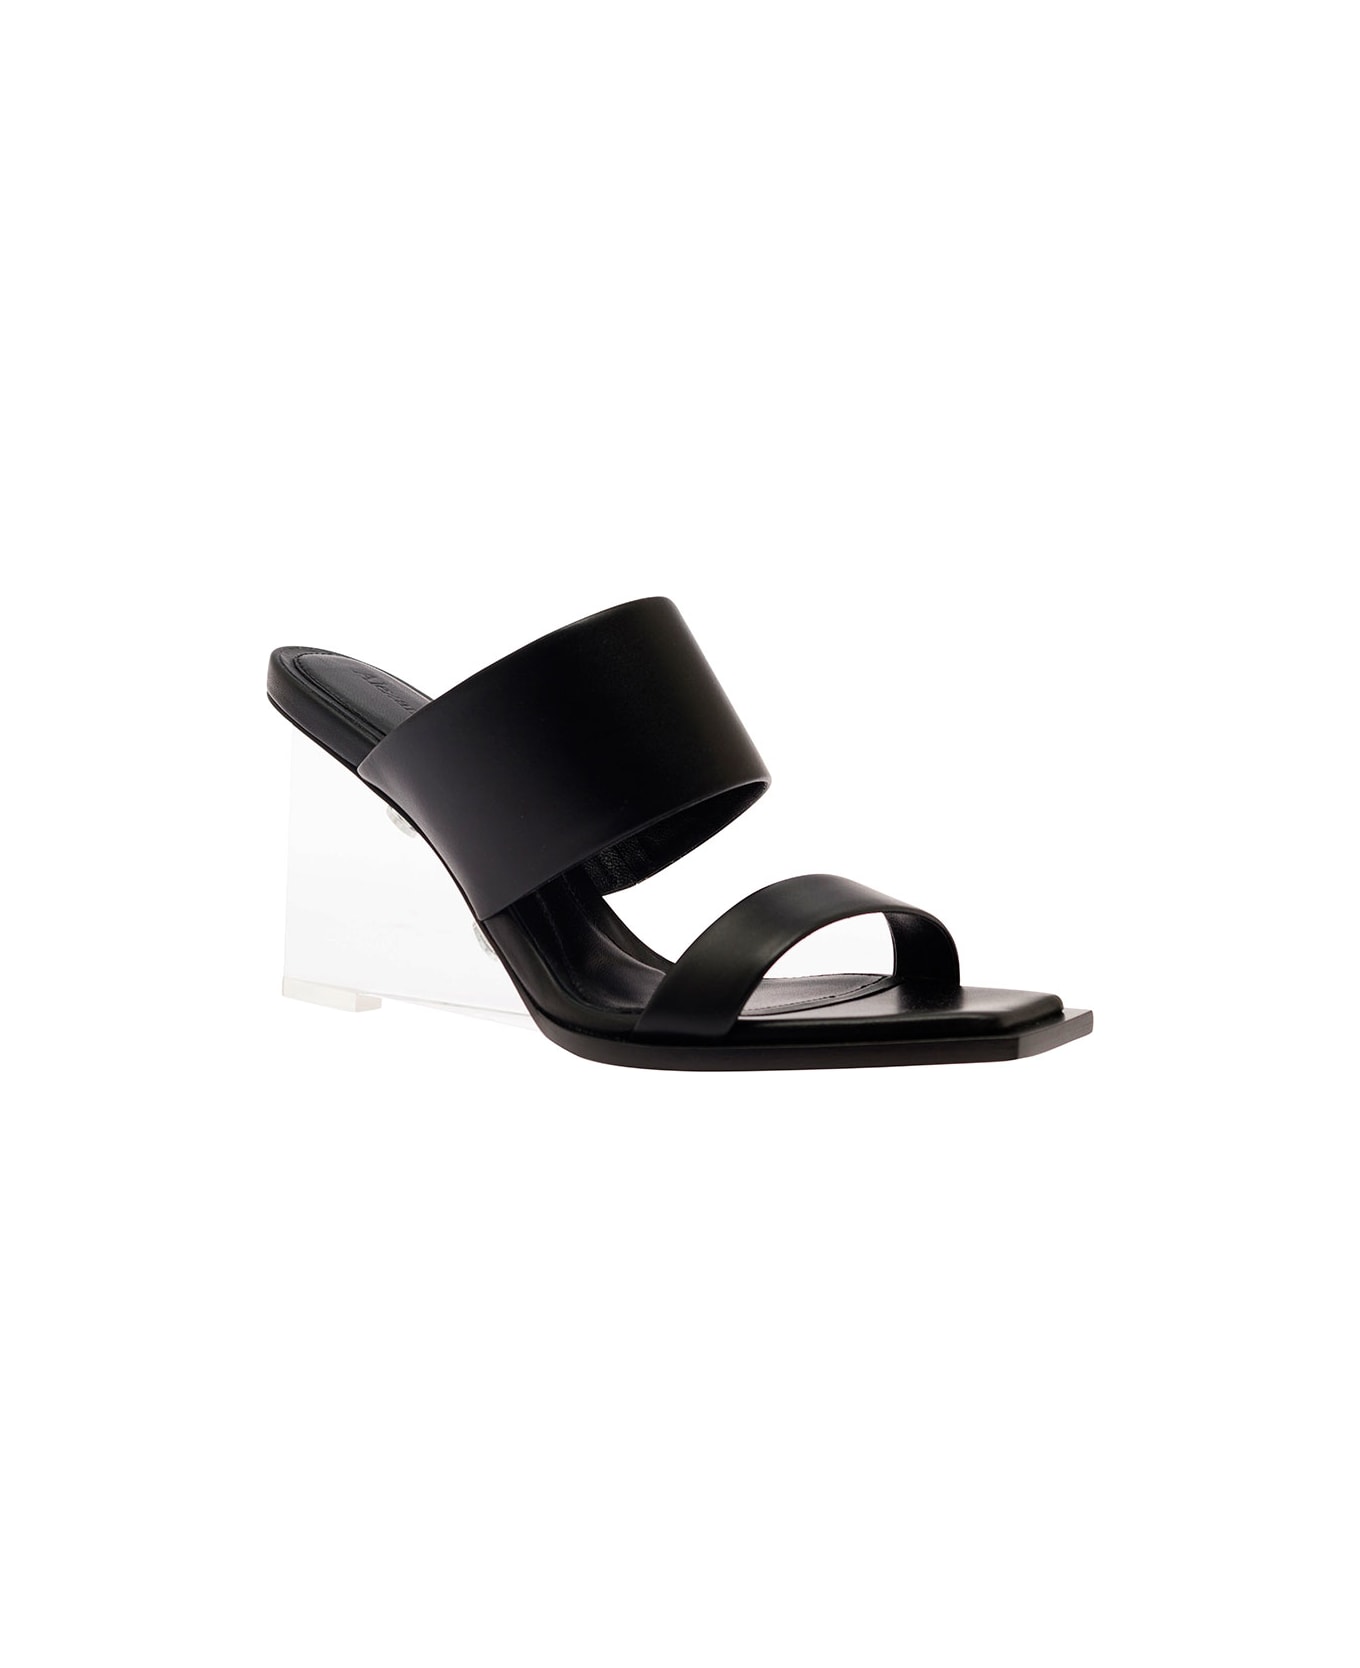 Alexander McQueen Black Wedge With Double Strap And Trasparent Plexiglass Heel In Smooth Leather Woman - Black サンダル